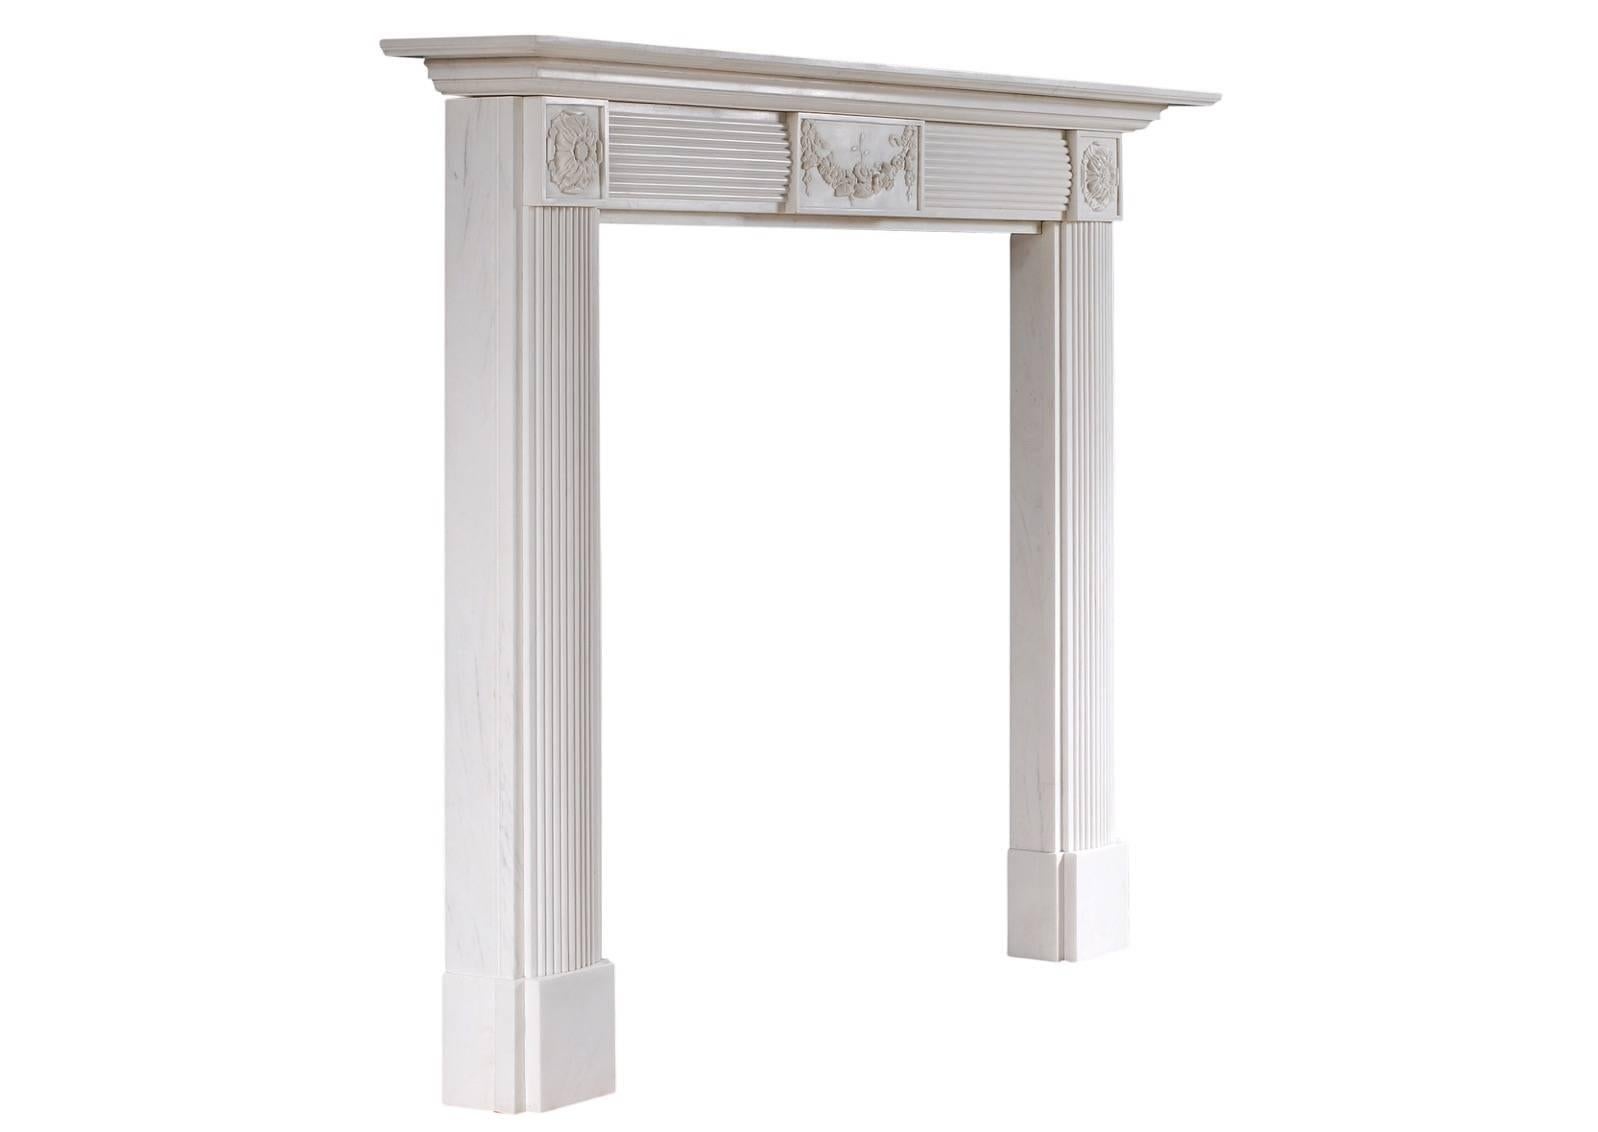 An English white marble fireplace in the Regency style. The jambs and frieze with matching bowed flutes and carved rosette paterae, the frieze with carved centre panel with swags and flowers. Stepped, moulded shelf. A good quality copy of a period